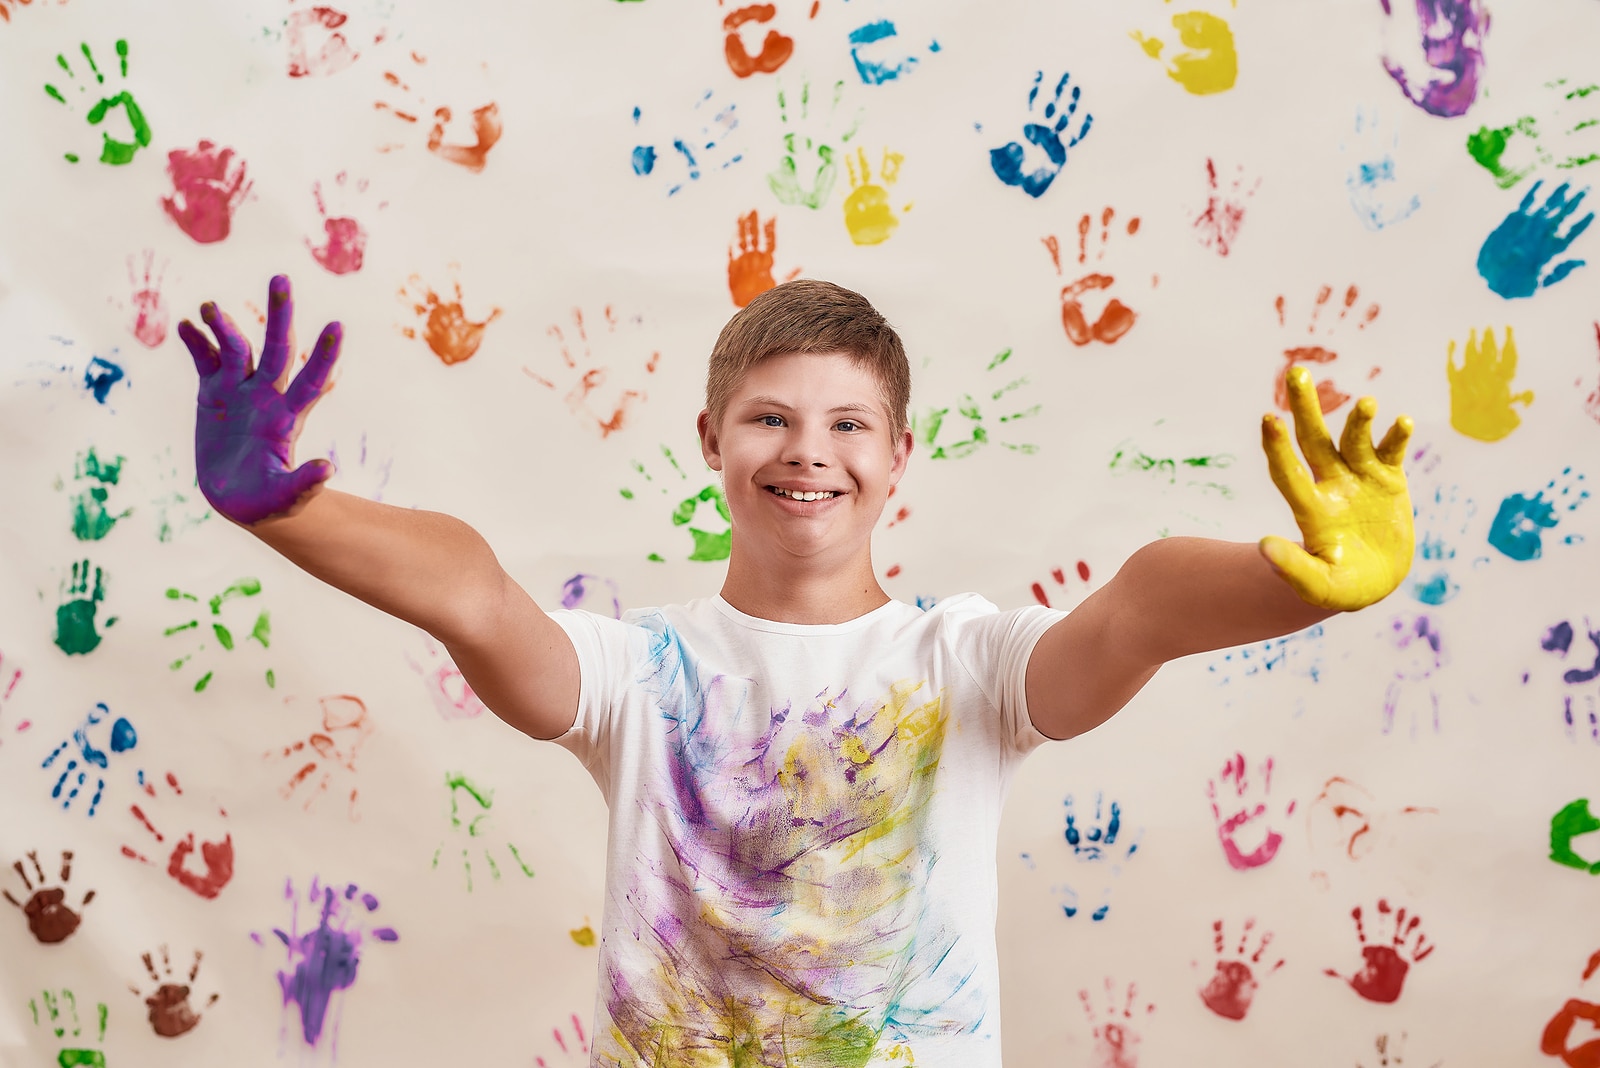 Happy disabled boy with Down syndrome smiling at camera while reaching out his hands painted in colorful paints ready for hand prints on the wall. Children with disabilities and special needs concept